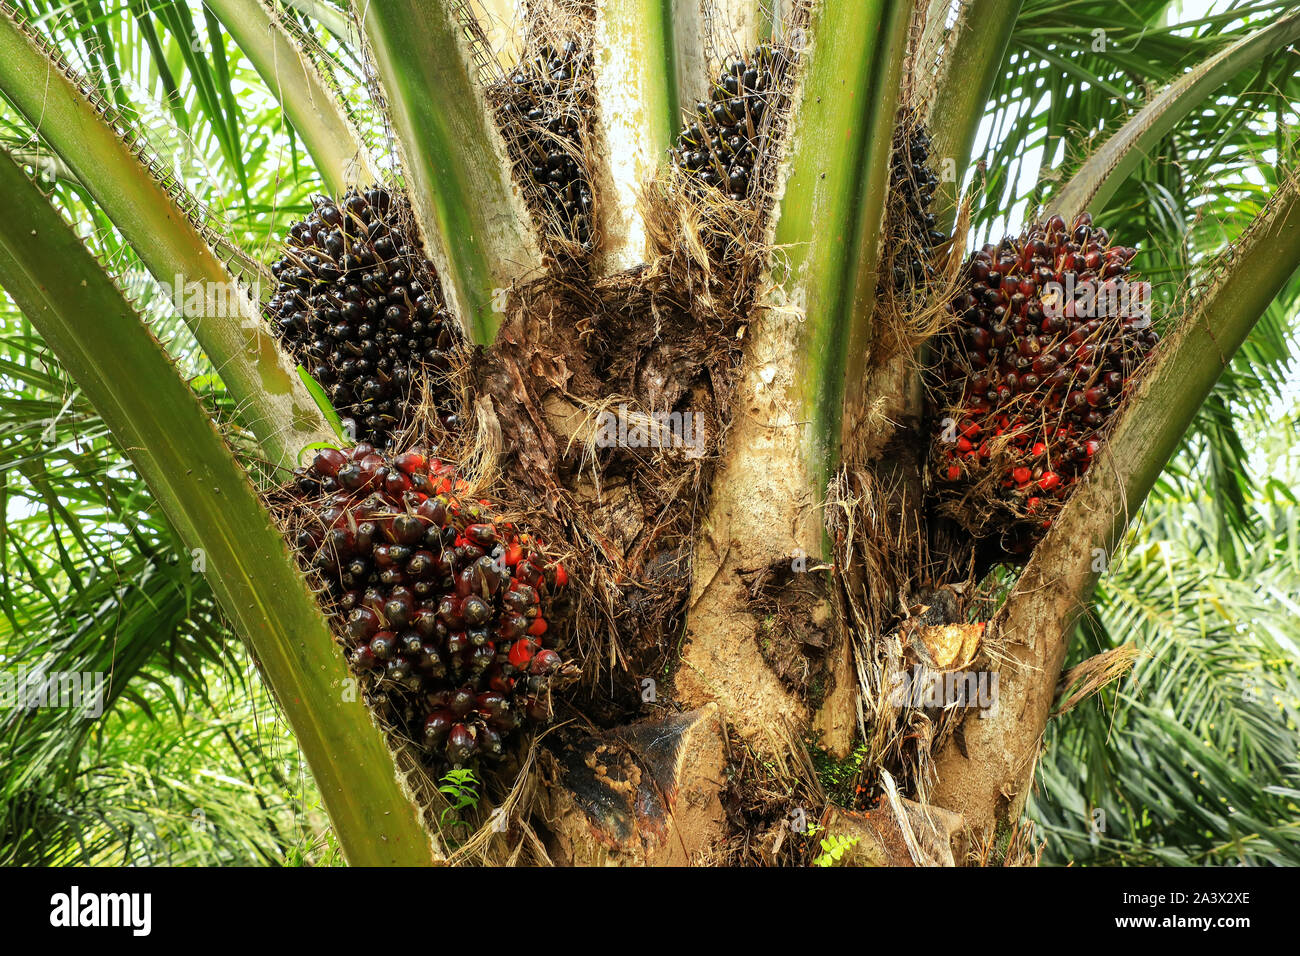 Close view of oil palm tree top with fruit. Palm oil cultivation has been criticized for impacts on the natural environment, including deforestation a Stock Photo